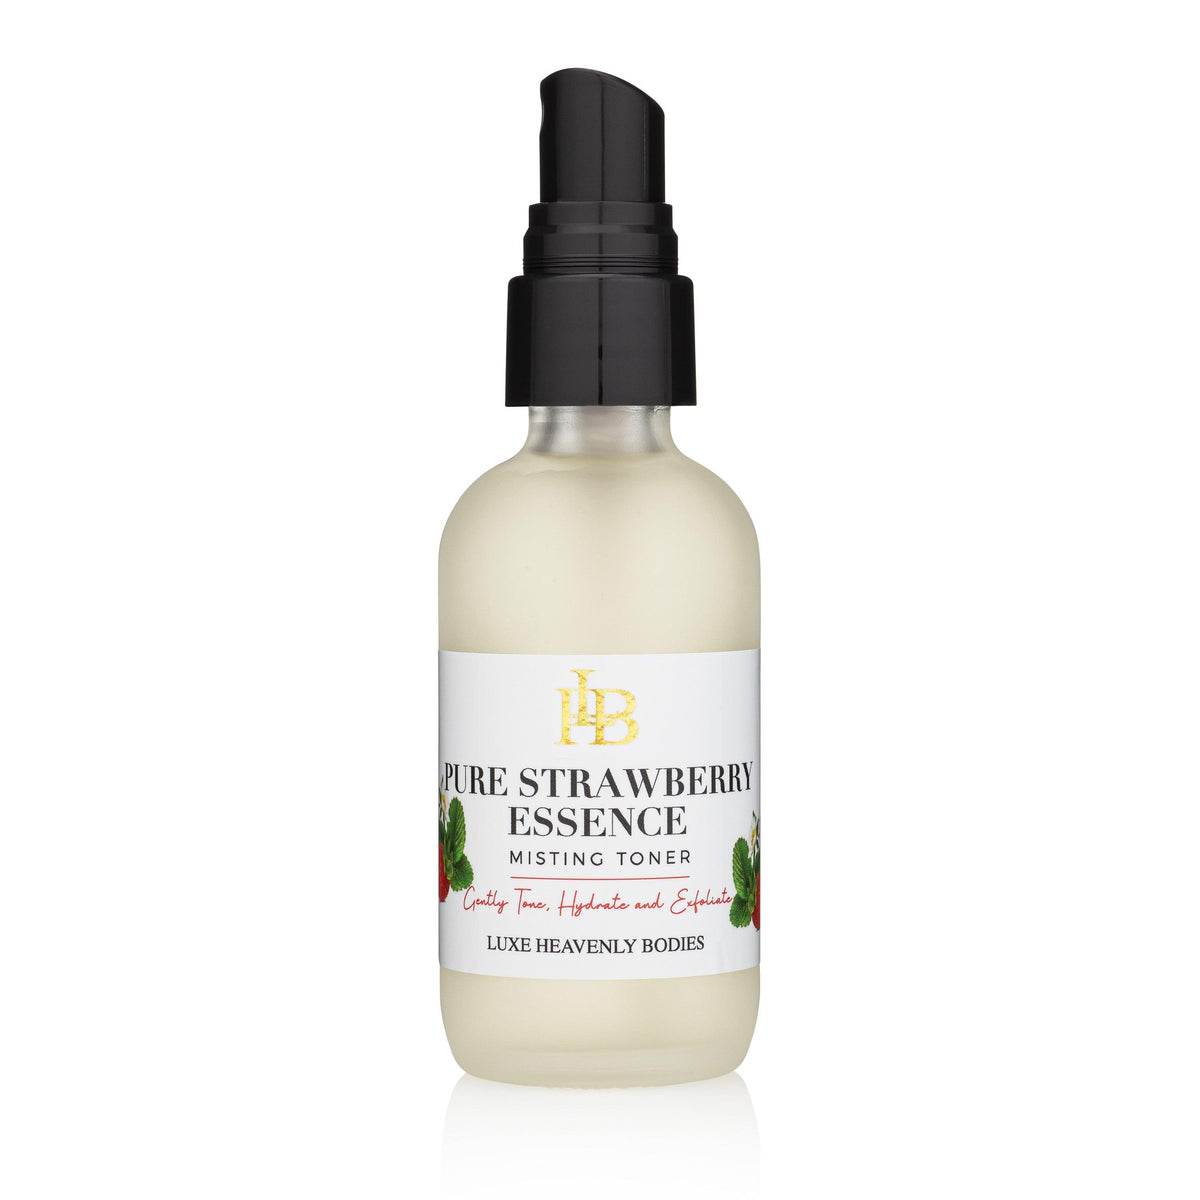 Pure Strawberry Essence Misting Toner - LUXE Heavenly Bodies